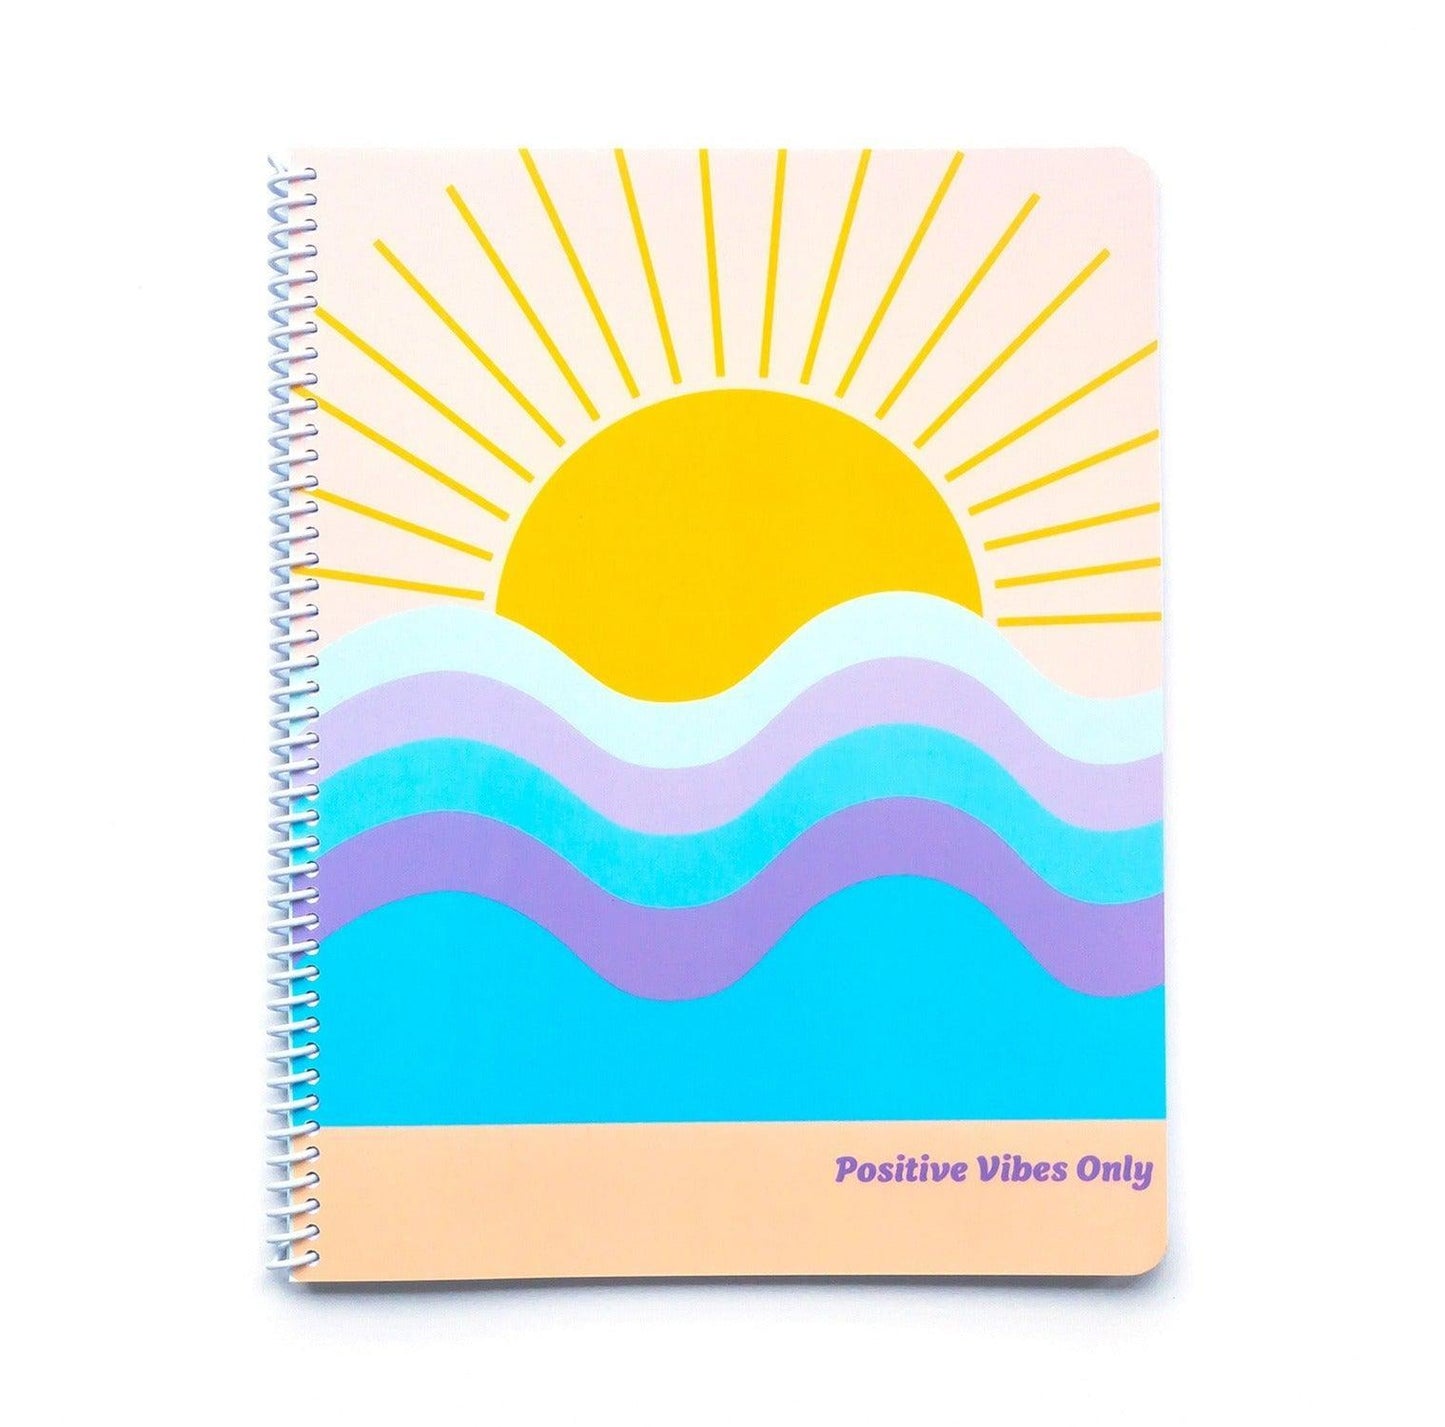 Positive Vibes Only Notebook - The front cover features a beautiful sun coming over the horizon at the beach with phrase Positive Vibes Only.